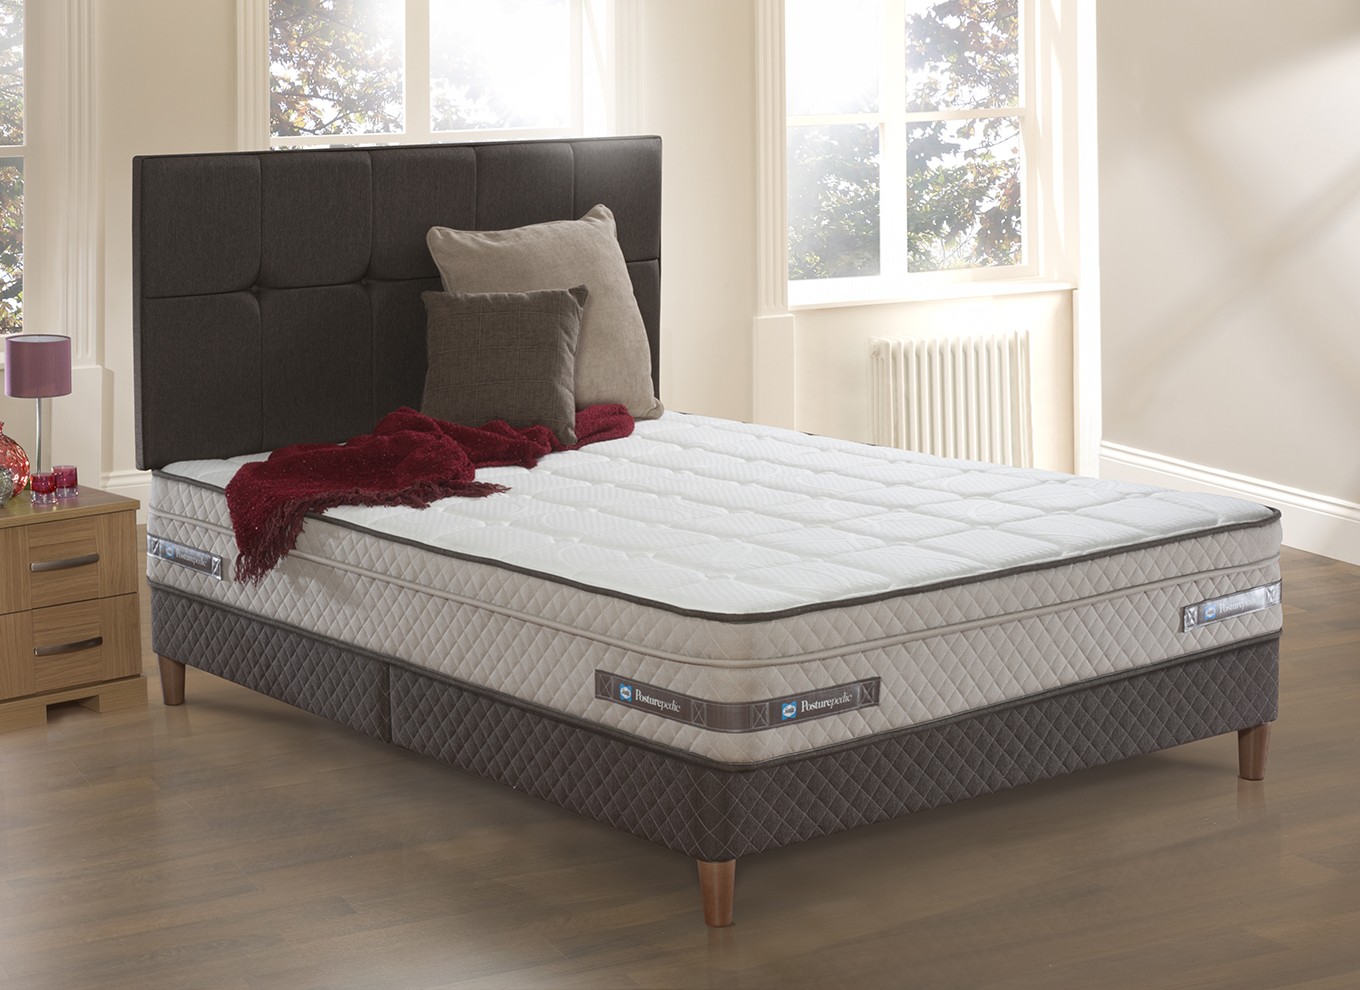 Sealy Pattison Posturetech Spring Divan Bed with